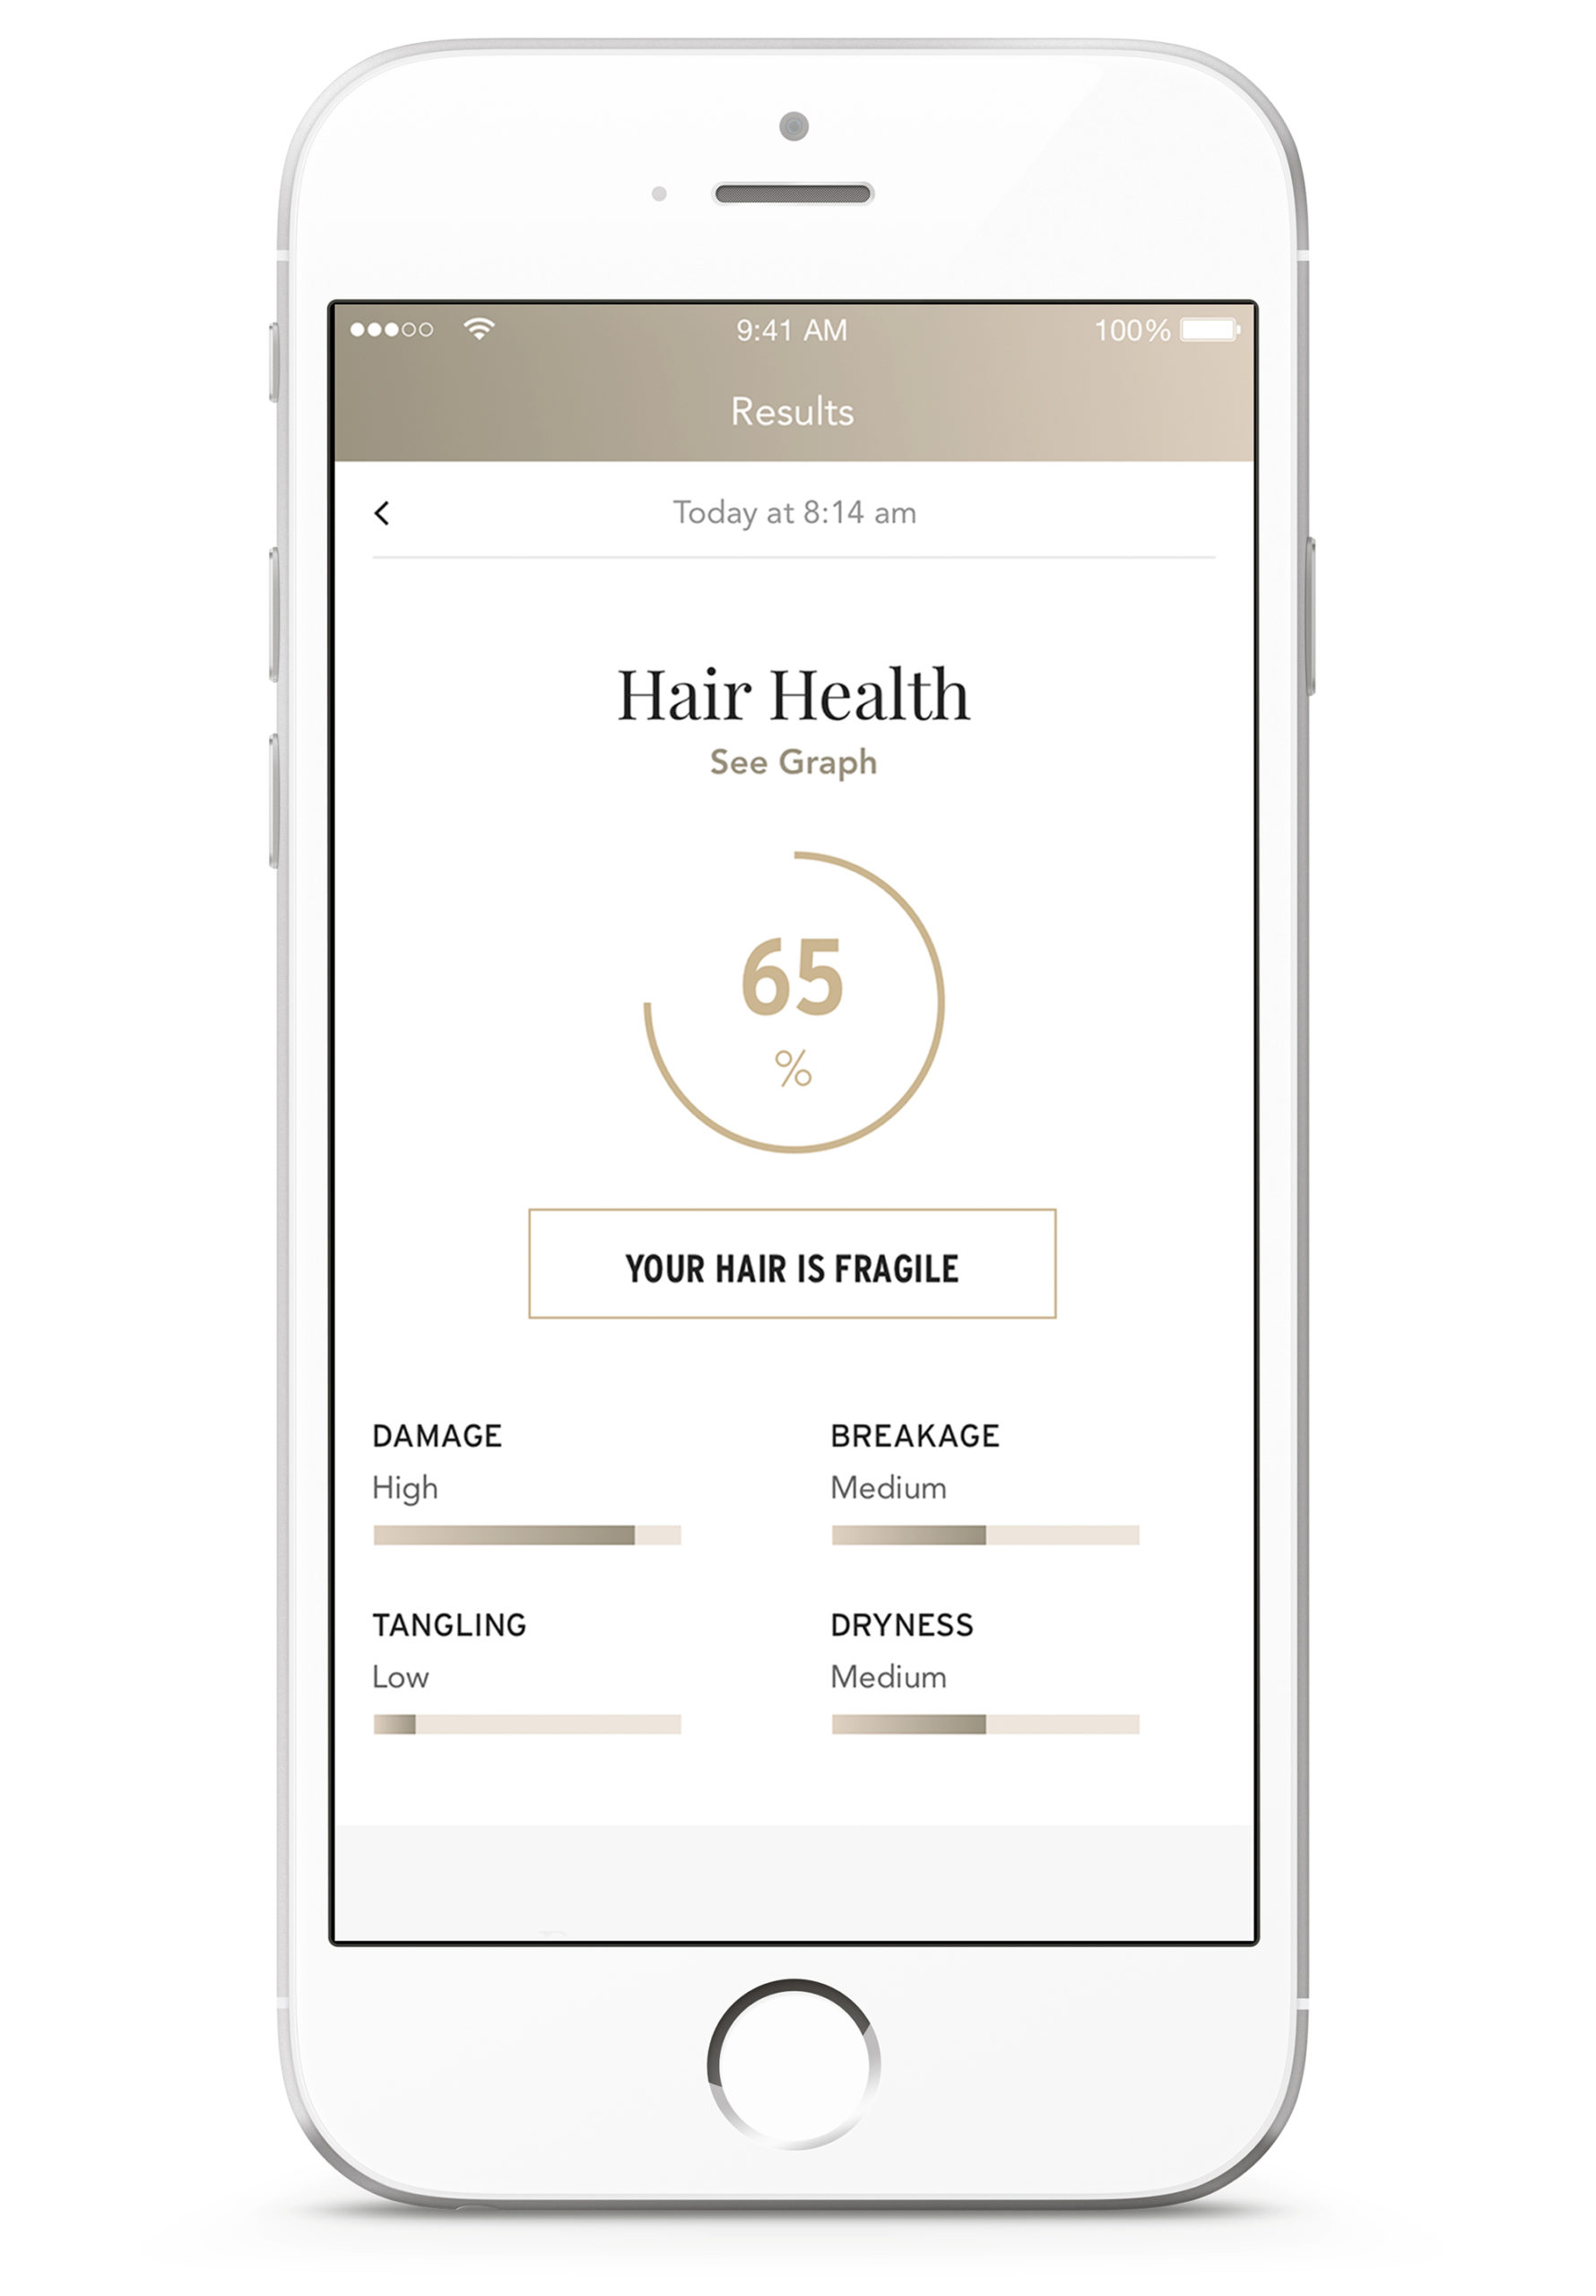 L’Oréal’s Smart Hairbrush Knows More About Your Hair Than Your Salon Does